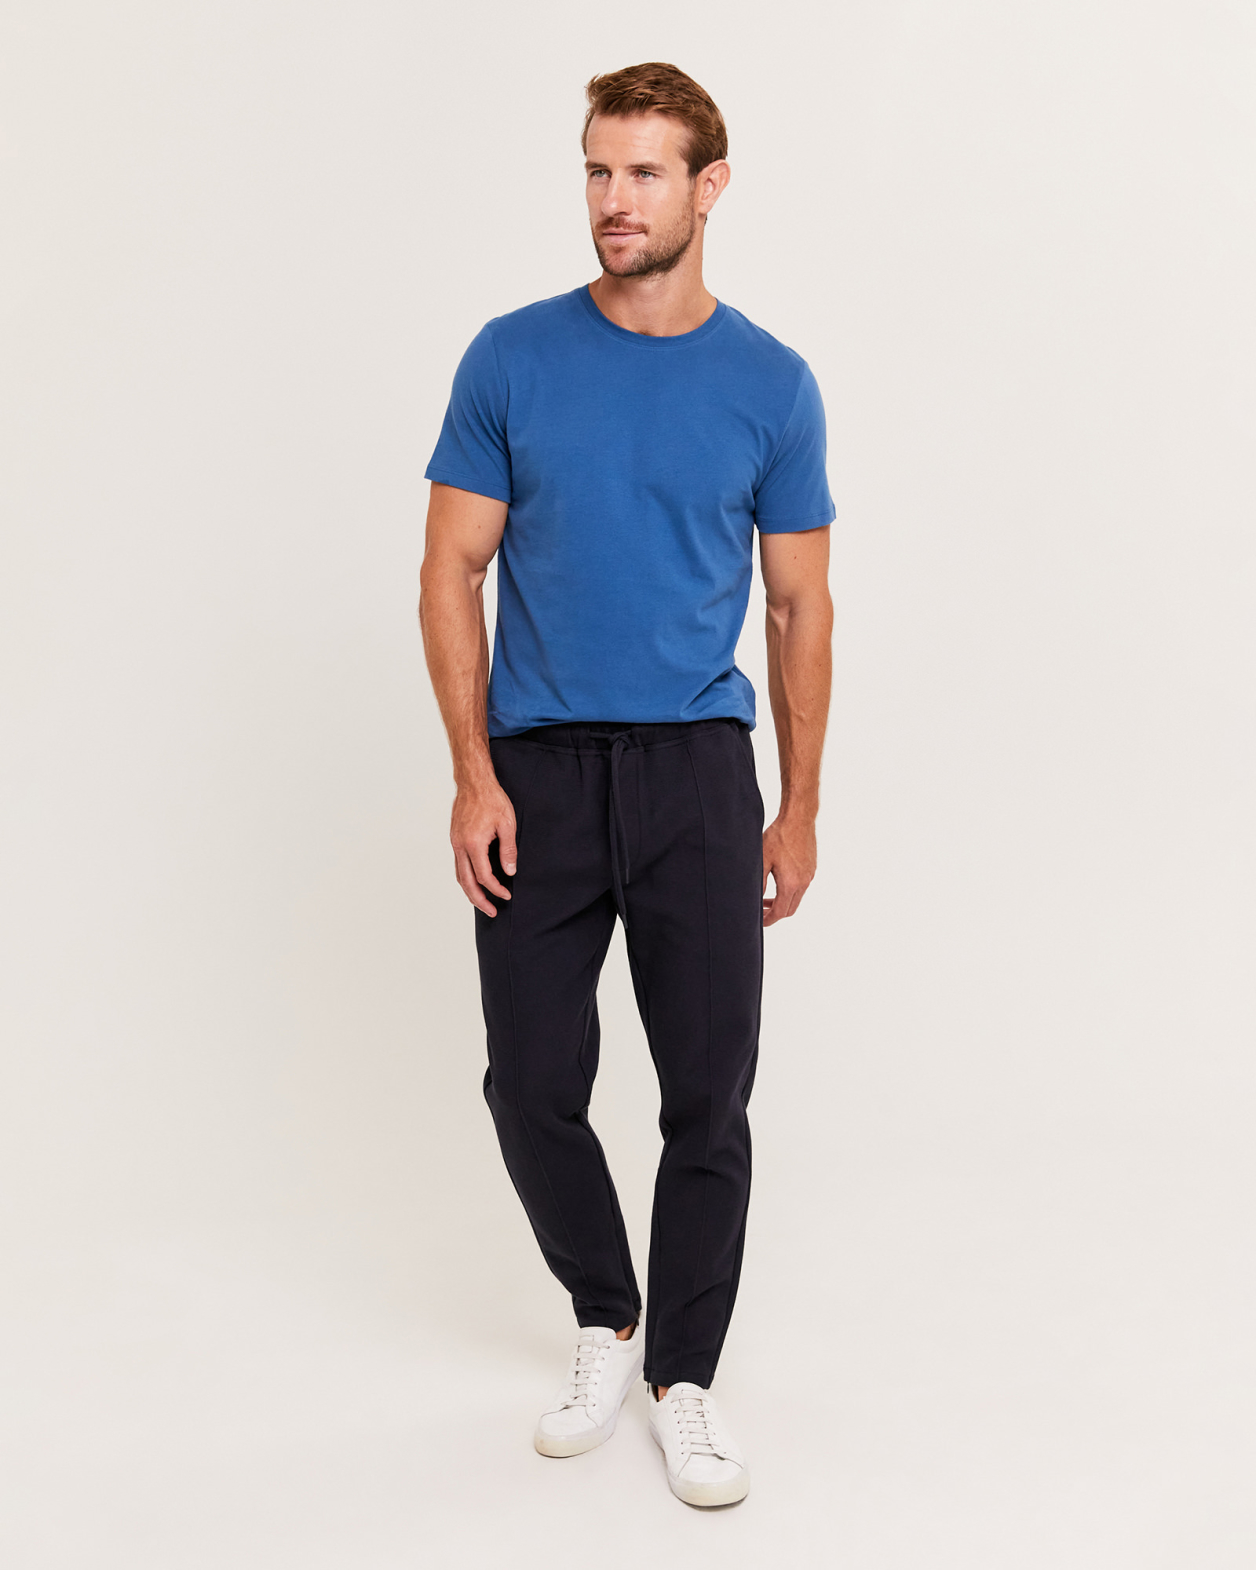 Mitchell Pant in NAVY